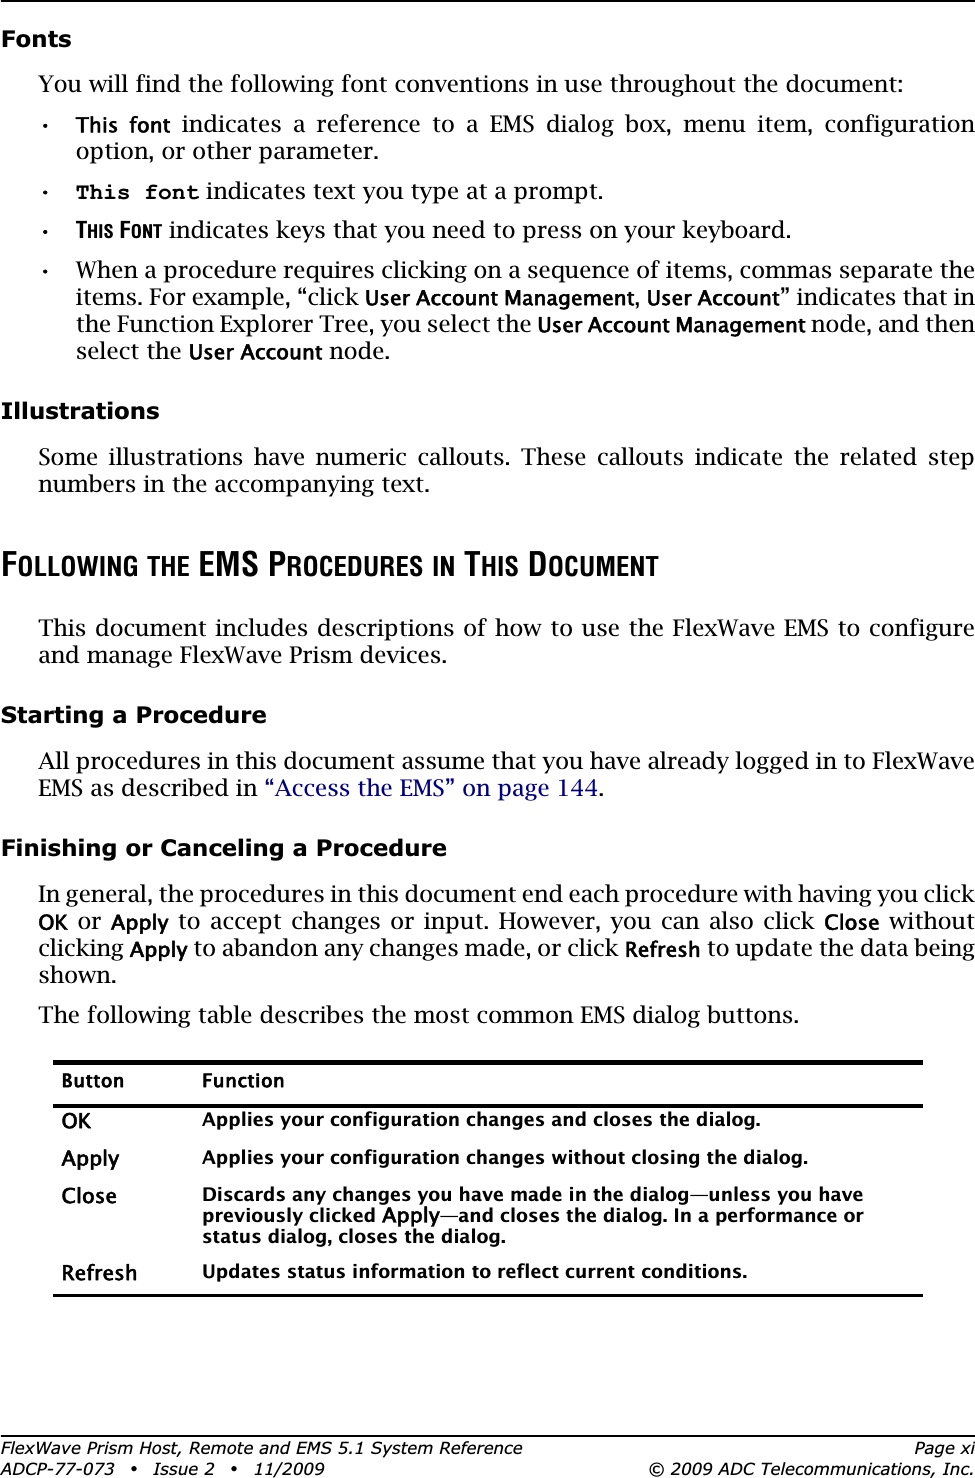 FlexWave Prism Host, Remote and EMS 5.1 System Reference Page xiADCP-77-073 • Issue 2 • 11/2009 © 2009 ADC Telecommunications, Inc.FontsYou will find the following font conventions in use throughout the document:•This  font indicates a reference to a EMS dialog box, menu item, configuration option, or other parameter. •This font indicates text you type at a prompt.•THIS FONT indicates keys that you need to press on your keyboard. •• When a procedure requires clicking on a sequence of items, commas separate the items. For example, “click User Account Management,User Account” indicates that in the Function Explorer Tree, you select the User Account Management node, and then select the User Account node.IllustrationsSome illustrations have numeric callouts. These callouts indicate the related step numbers in the accompanying text.FOLLOWING THE EMS PROCEDURES IN THIS DOCUMENTThis document includes descriptions of how to use the FlexWave EMS to configure and manage FlexWave Prism devices. Starting a ProcedureAll procedures in this document assume that you have already logged in to FlexWave EMS as described in “Access the EMS” on page 144.Finishing or Canceling a ProcedureIn general, the procedures in this document end each procedure with having you click OK or Apply to accept changes or input. However, you can also click Close without clickingApply to abandon any changes made, or click Refresh to update the data being shown.The following table describes the most common EMS dialog buttons.Button FunctionOKApplies your configuration changes and closes the dialog.ApplyApplies your configuration changes without closing the dialog.CloseDiscards any changes you have made in the dialog—unless you have previously clicked Apply—and closes the dialog. In a performance or status dialog, closes the dialog.RefreshUpdates status information to reflect current conditions.